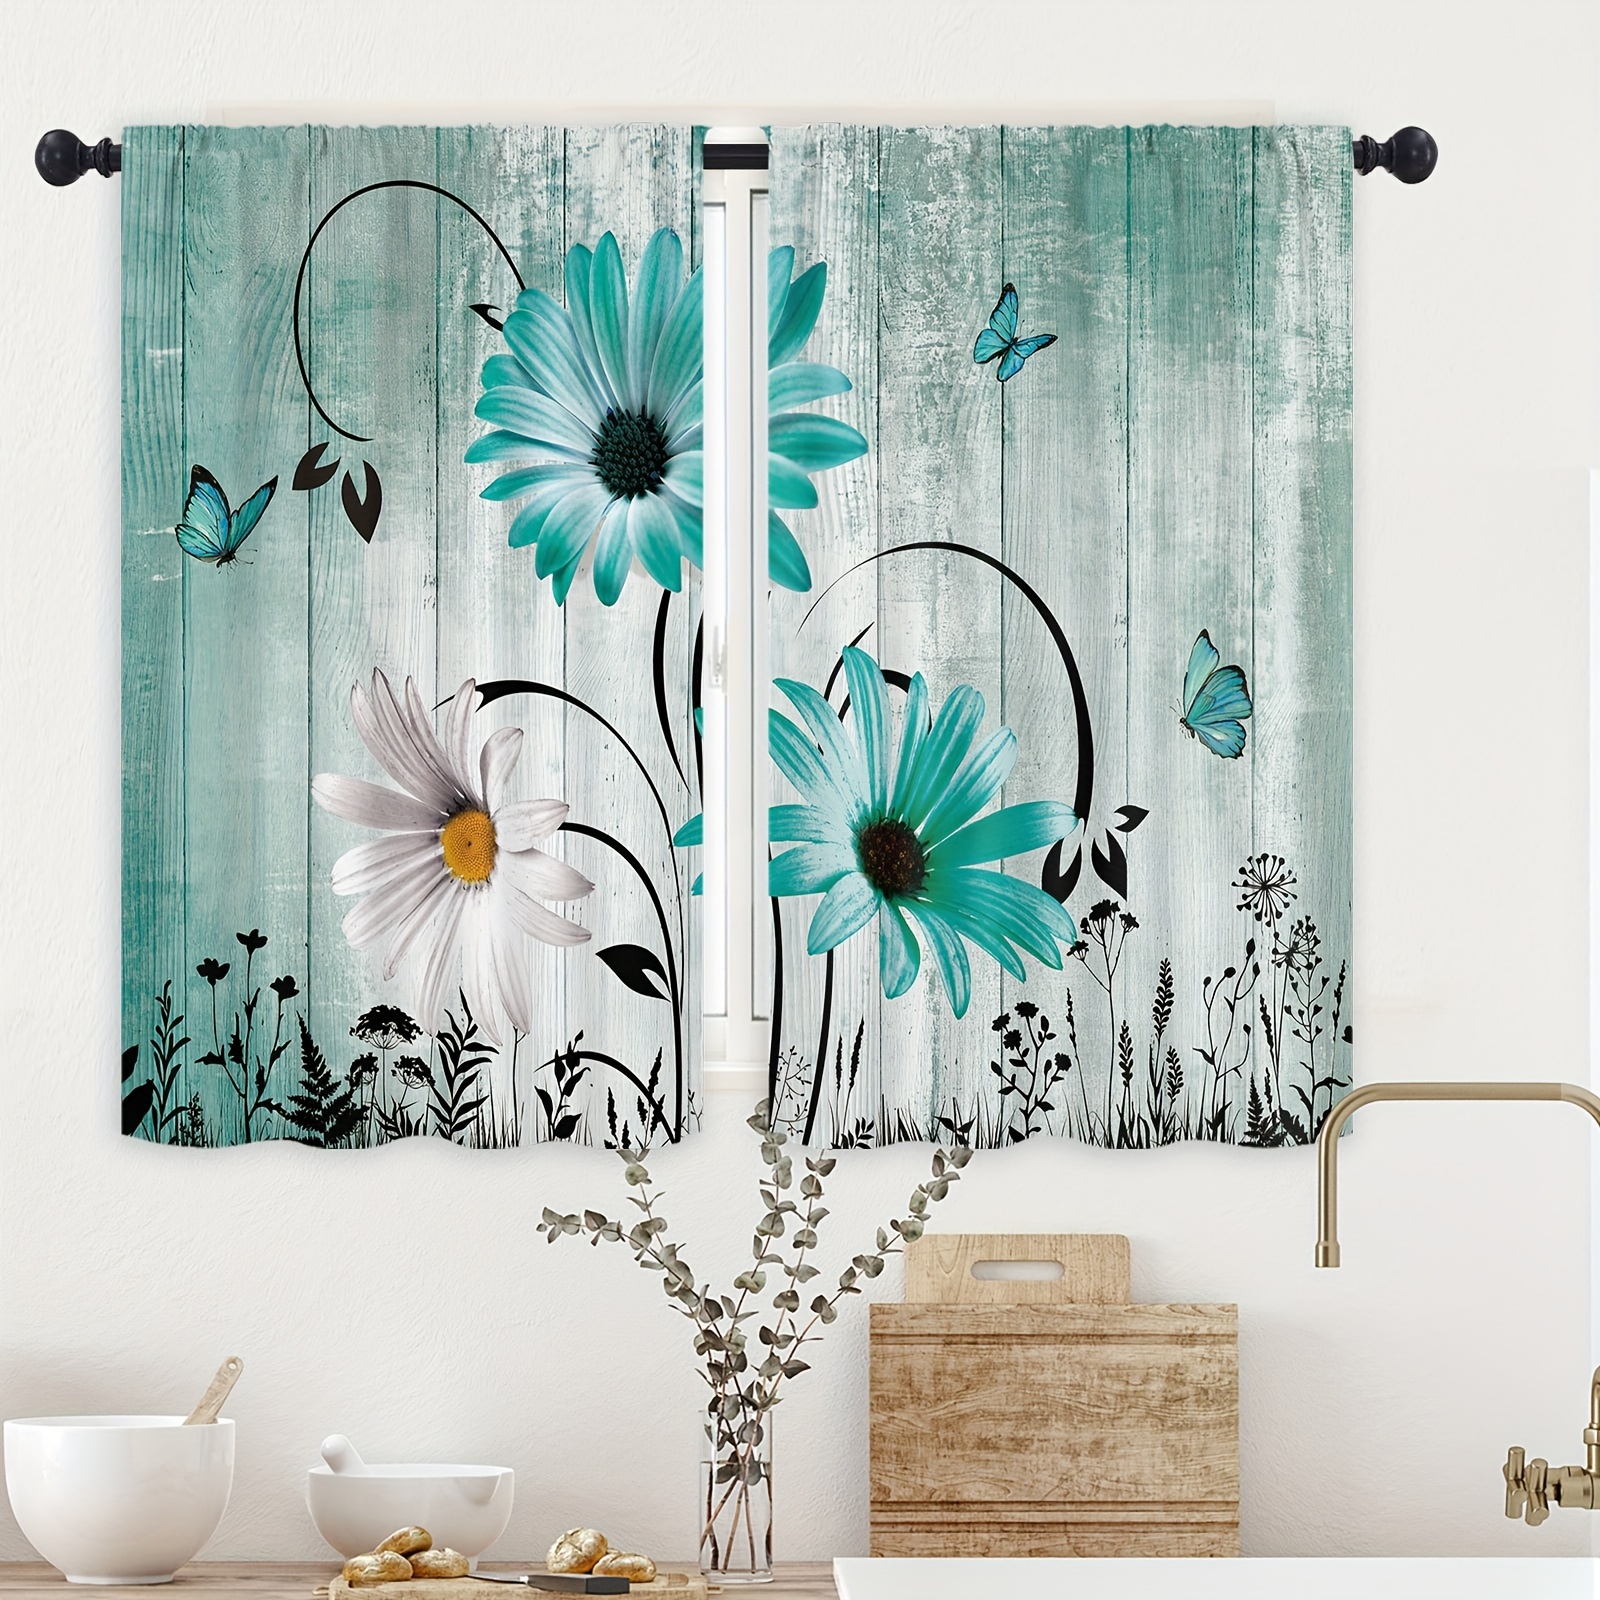 

2pc Daisy Farmhouse Rustic Kitchen Curtains Tiers Teal Vintage Plant Botanical Flower Floral Pattern Small Short Cafe Window Curtains Window Treatment Living Room Home Decor, 27.5inchx39inch